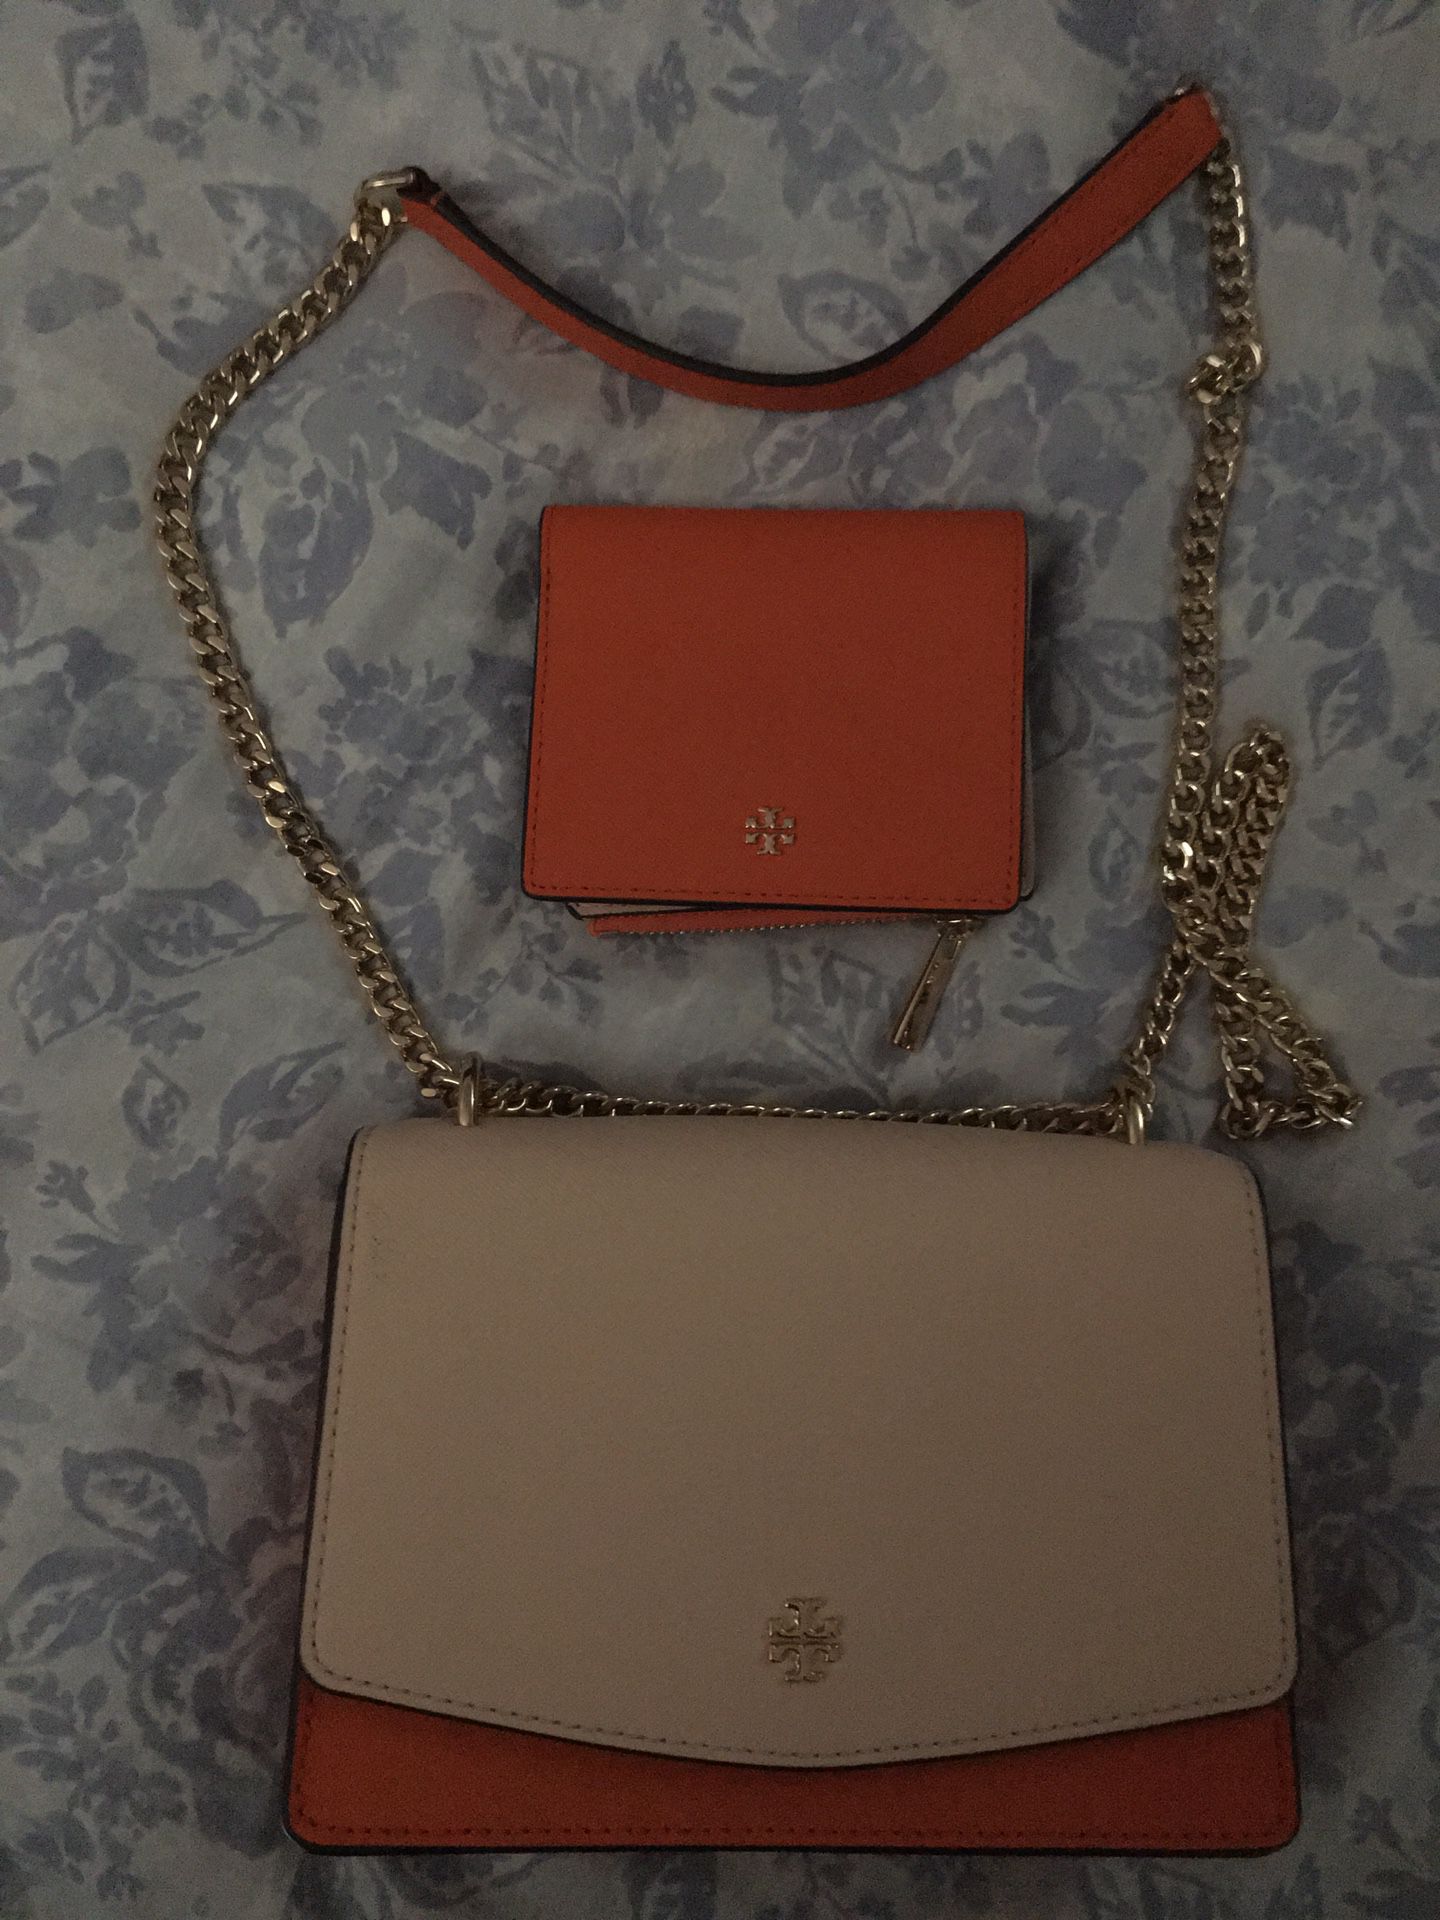 Tory burch purse and wallet